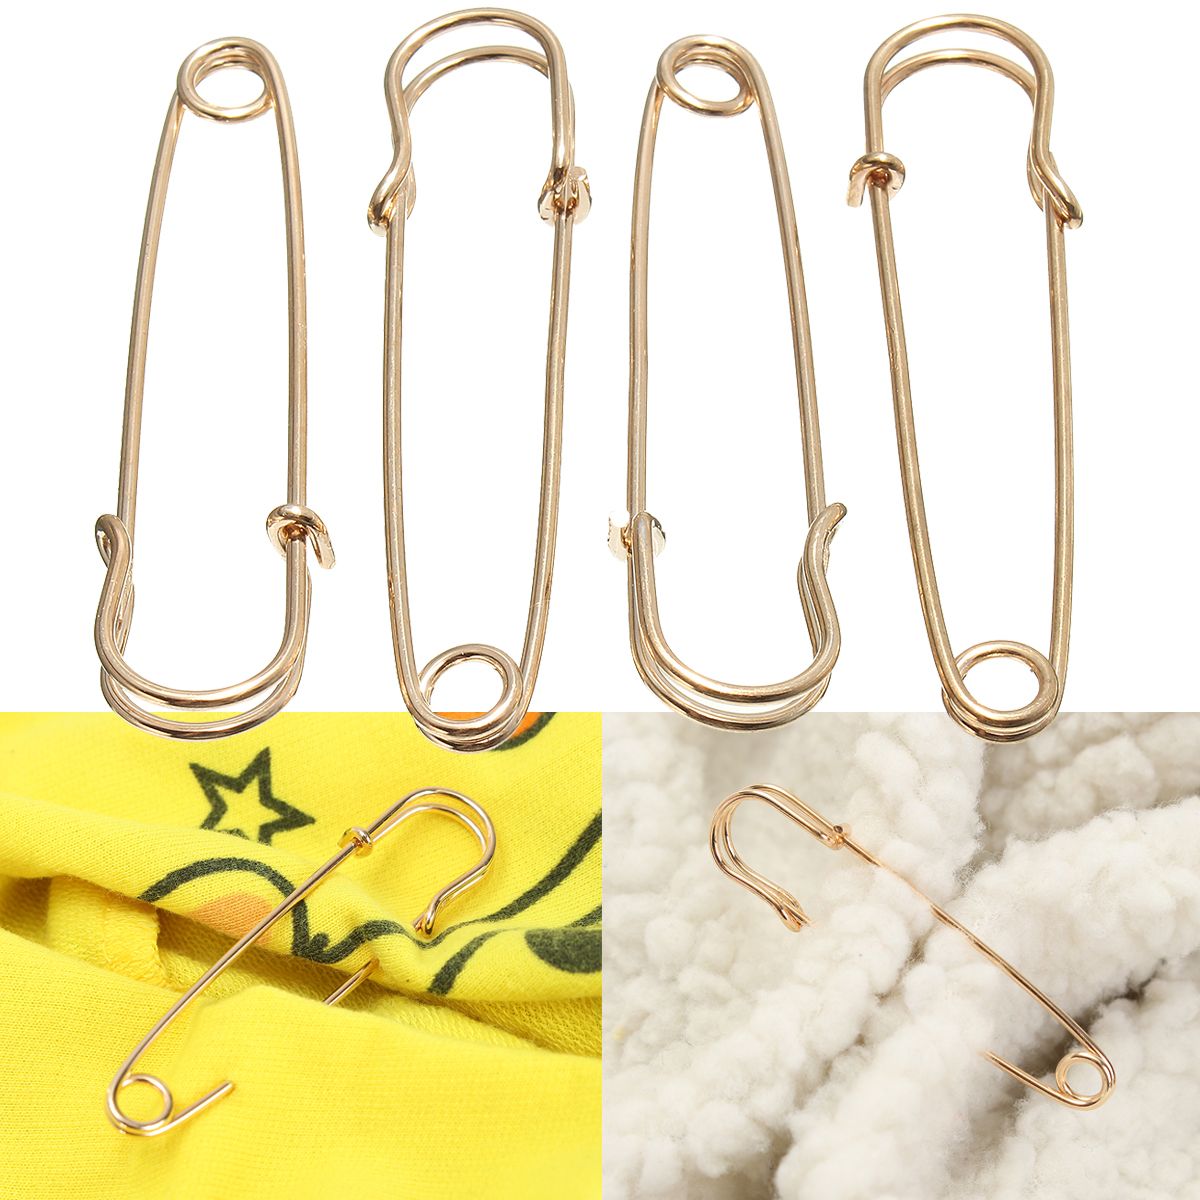 4Pcs-50mm-Safety-Pins-Scarf-Needle-Cloth-for-Sewing-Craft-1123532